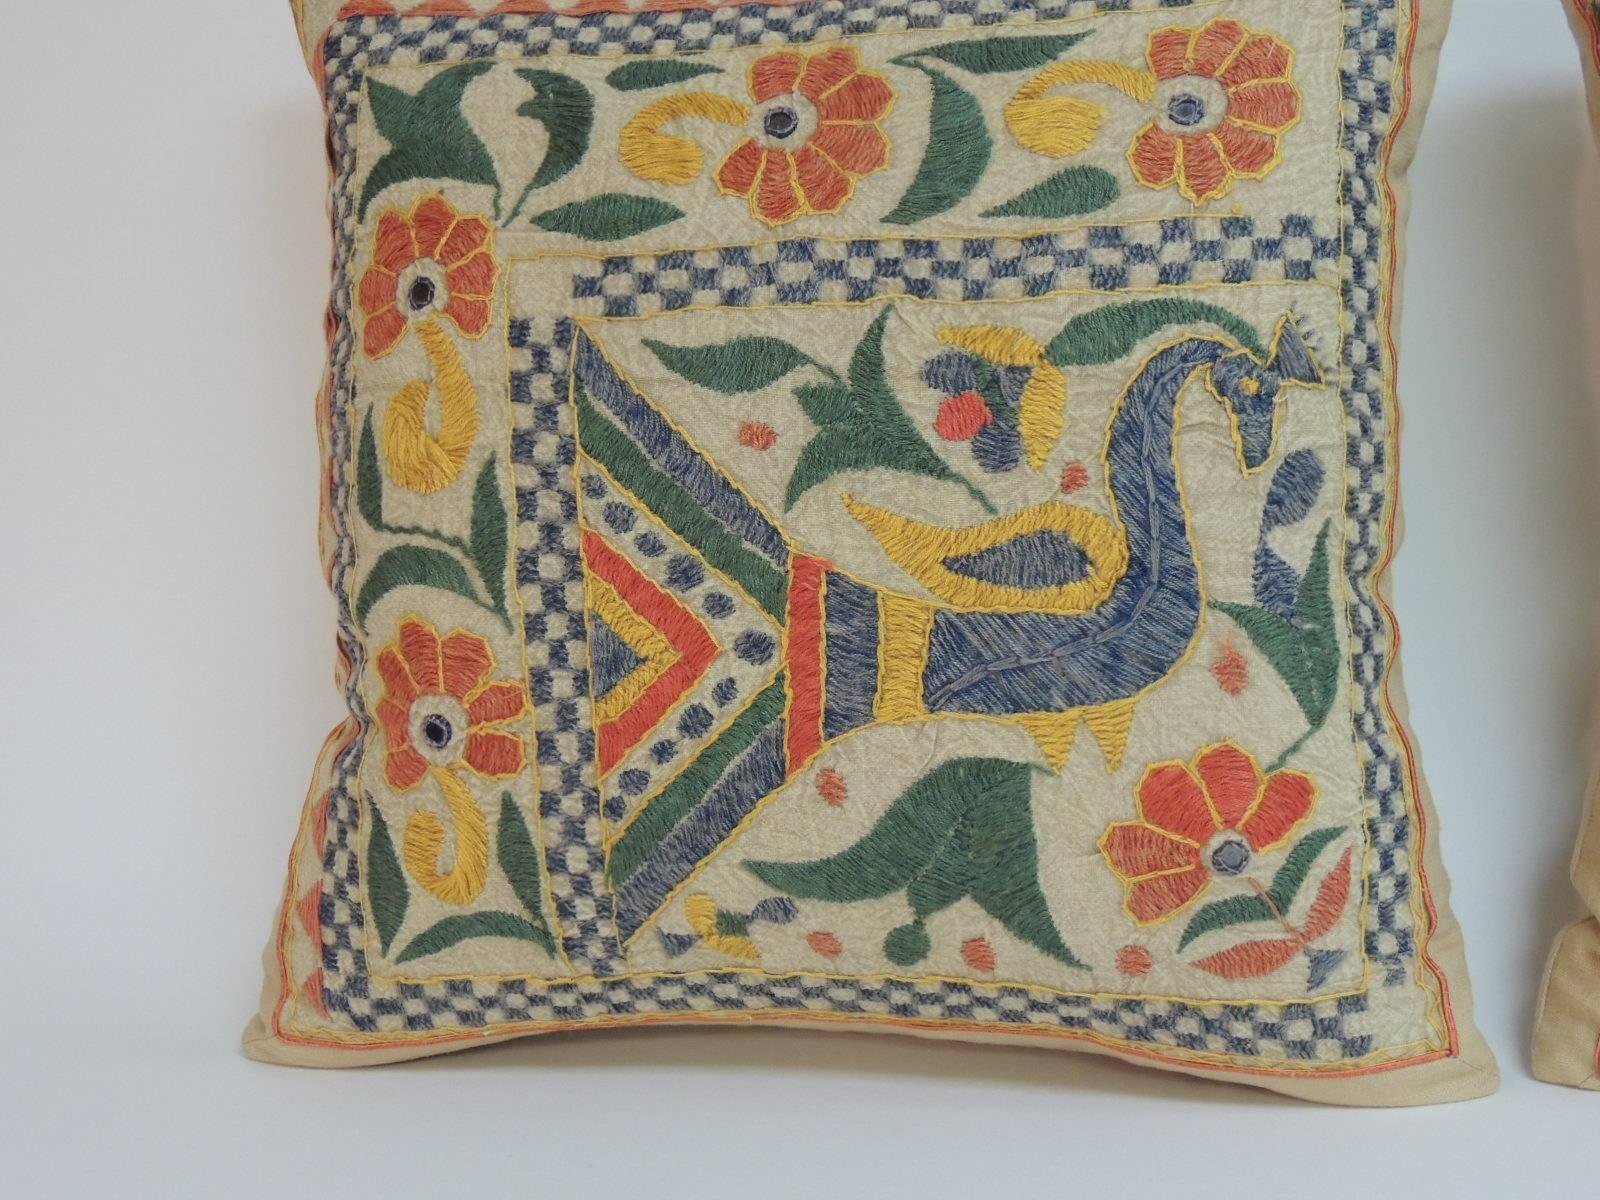 Pair of colorful Indian hand embroidered decorative pillows. Front panel textile was embroidered with cotton threads on linen and has been reinforced to add strength to the pillows. Decorative pillows depict peacock and is framed with yellow